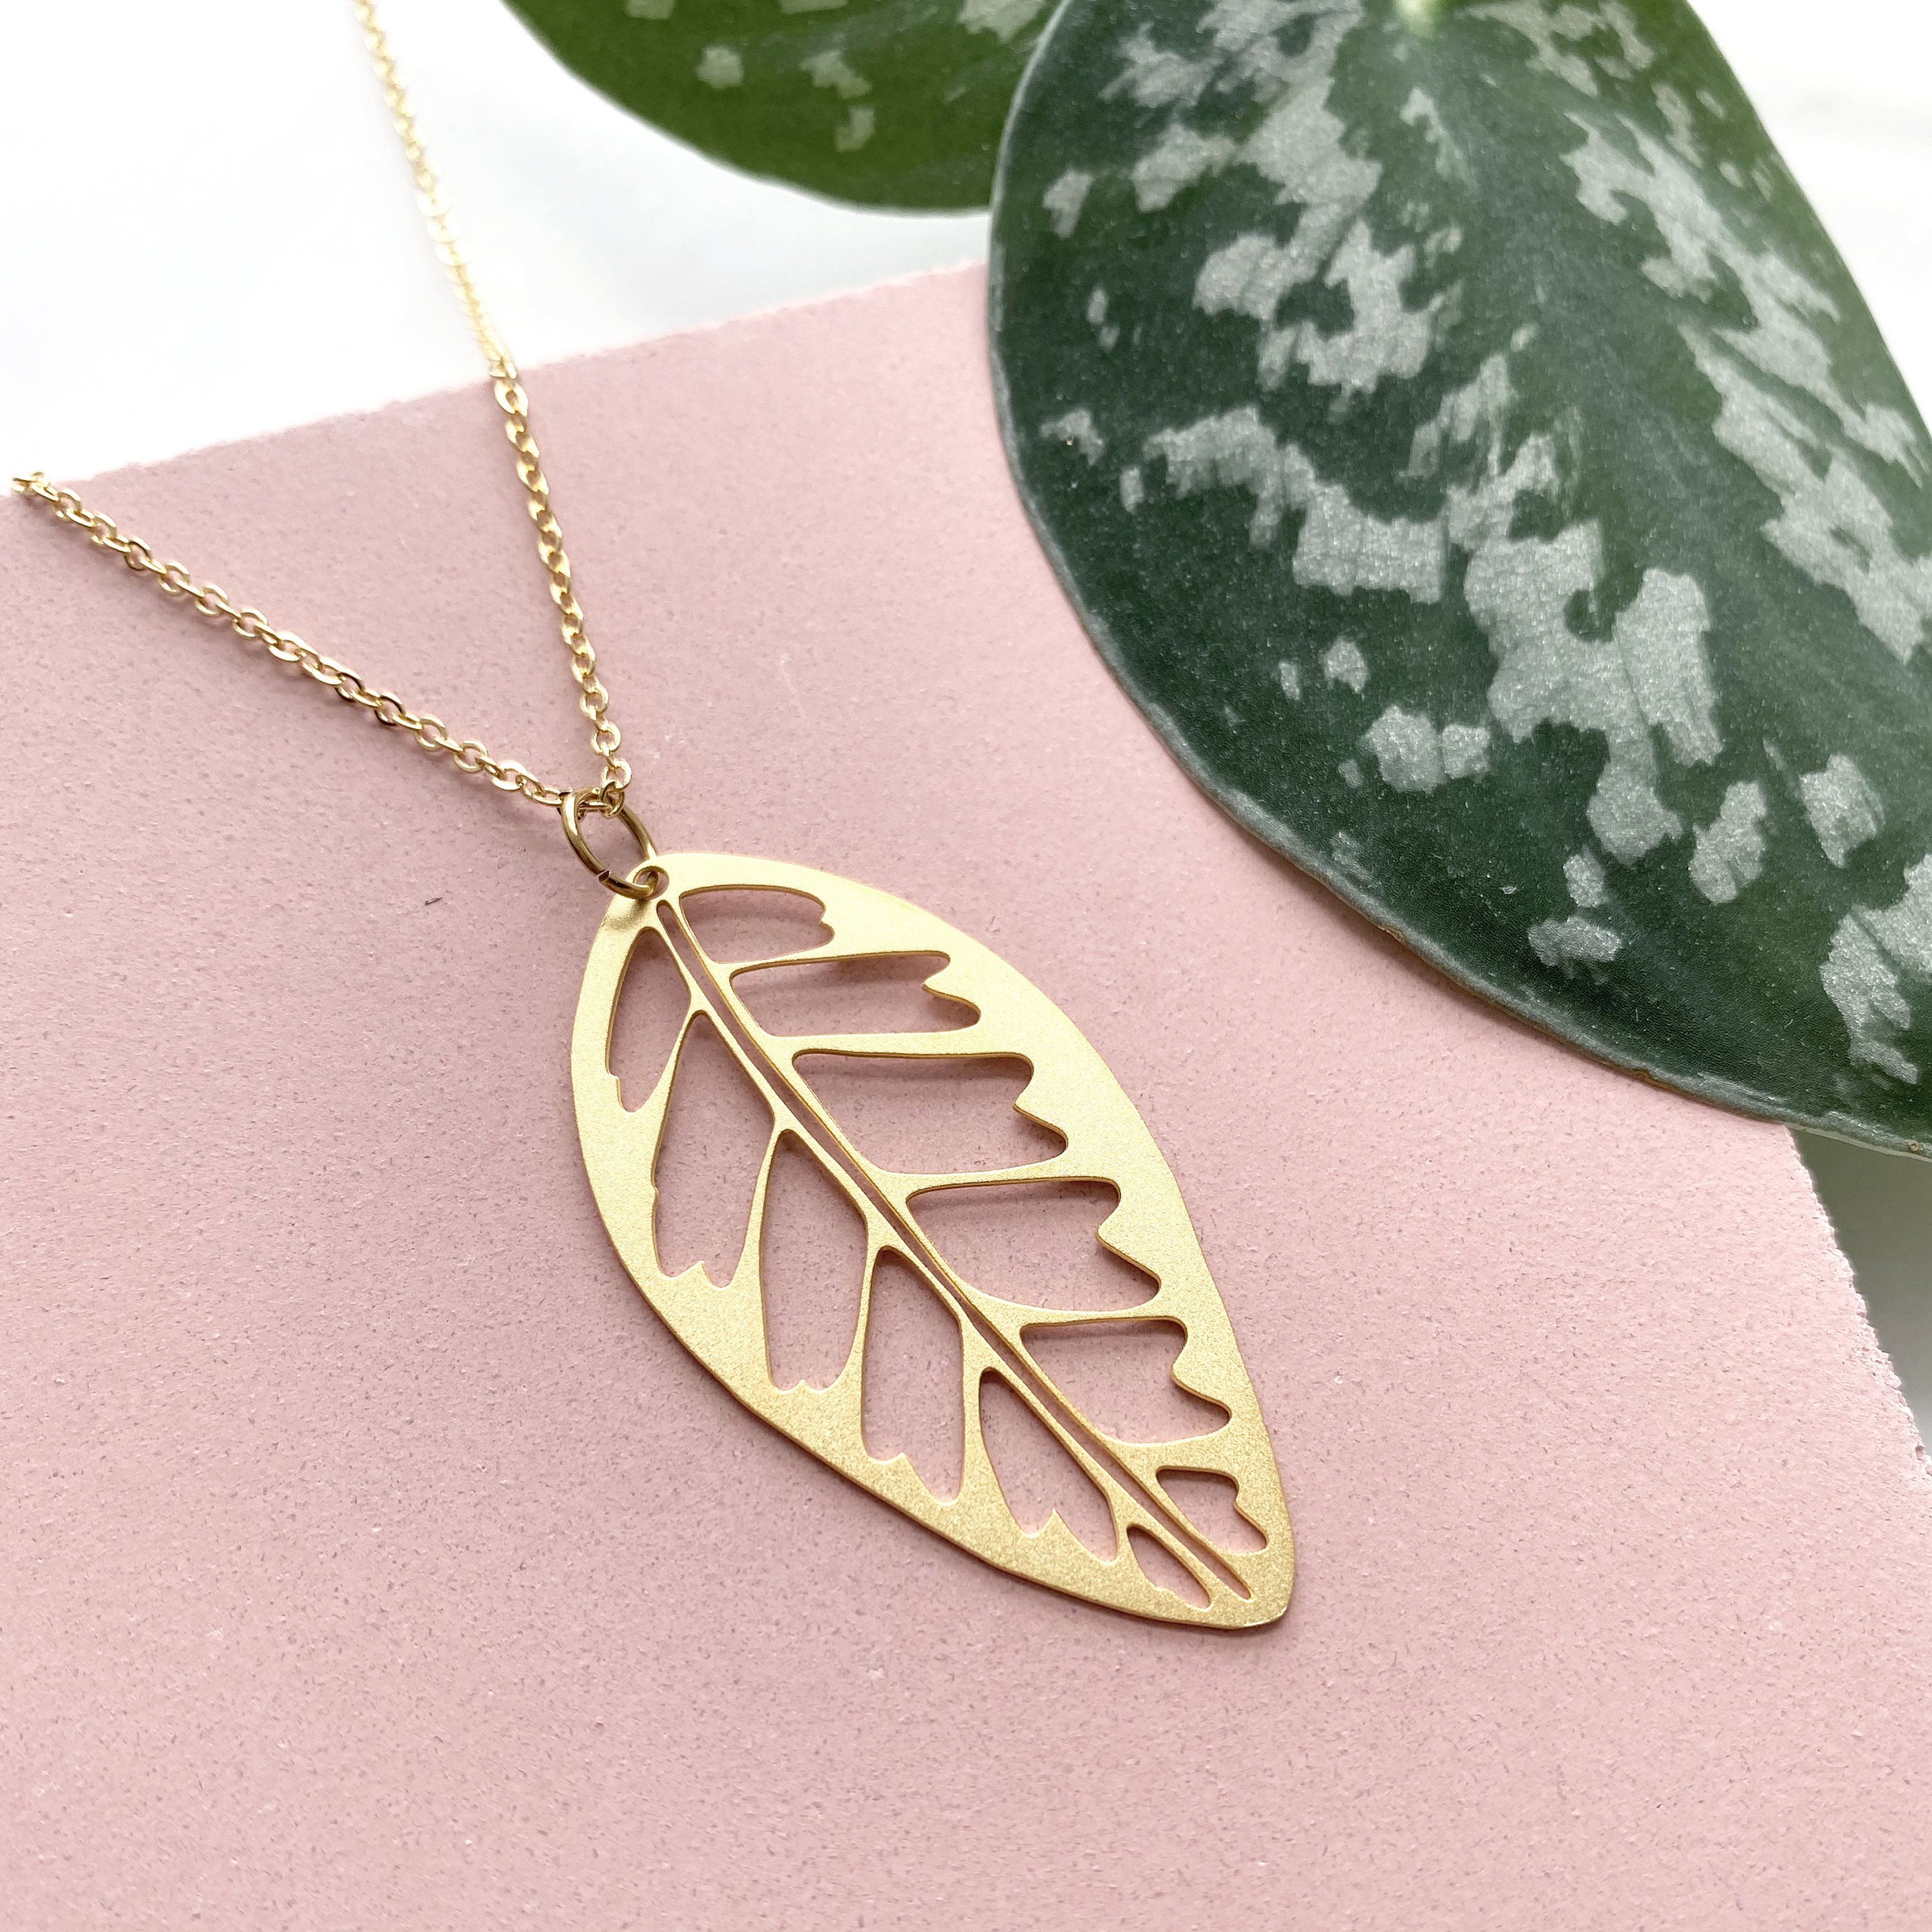 Tropical Gold Leaf Necklace - Simple Pendant Gift For Her Plant Jewellery Calathea